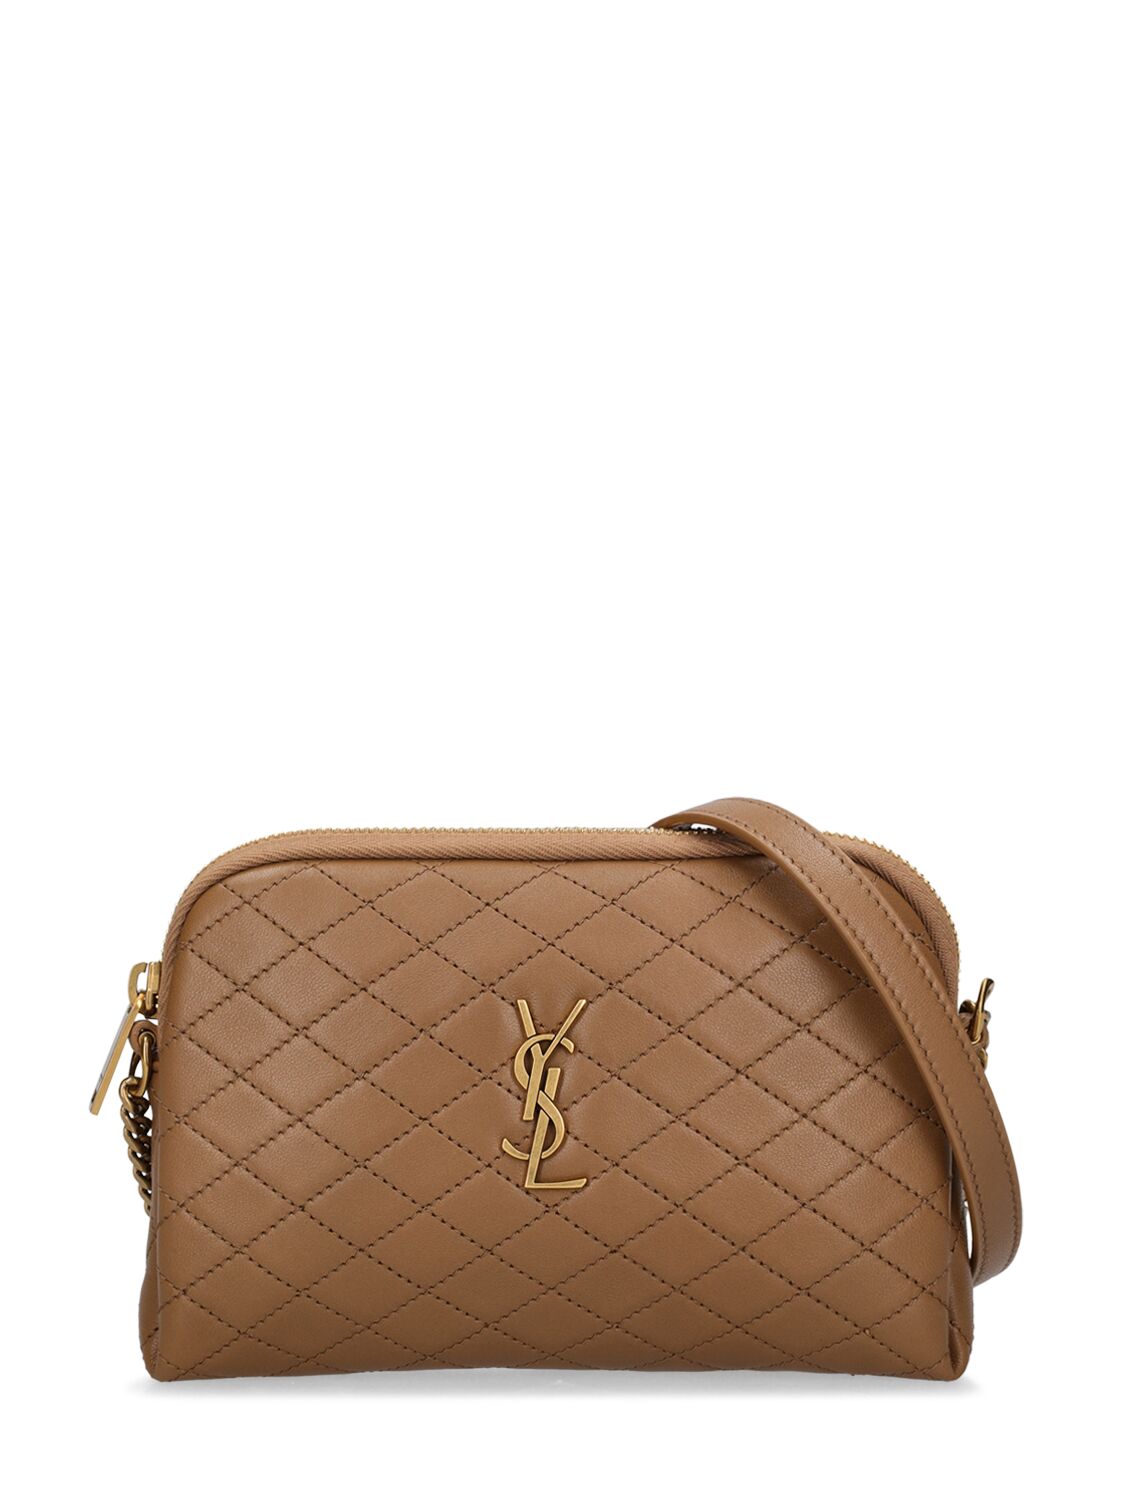 Saint Laurent Mini Gaby Quilted Leather Shoulder Bag In Buff